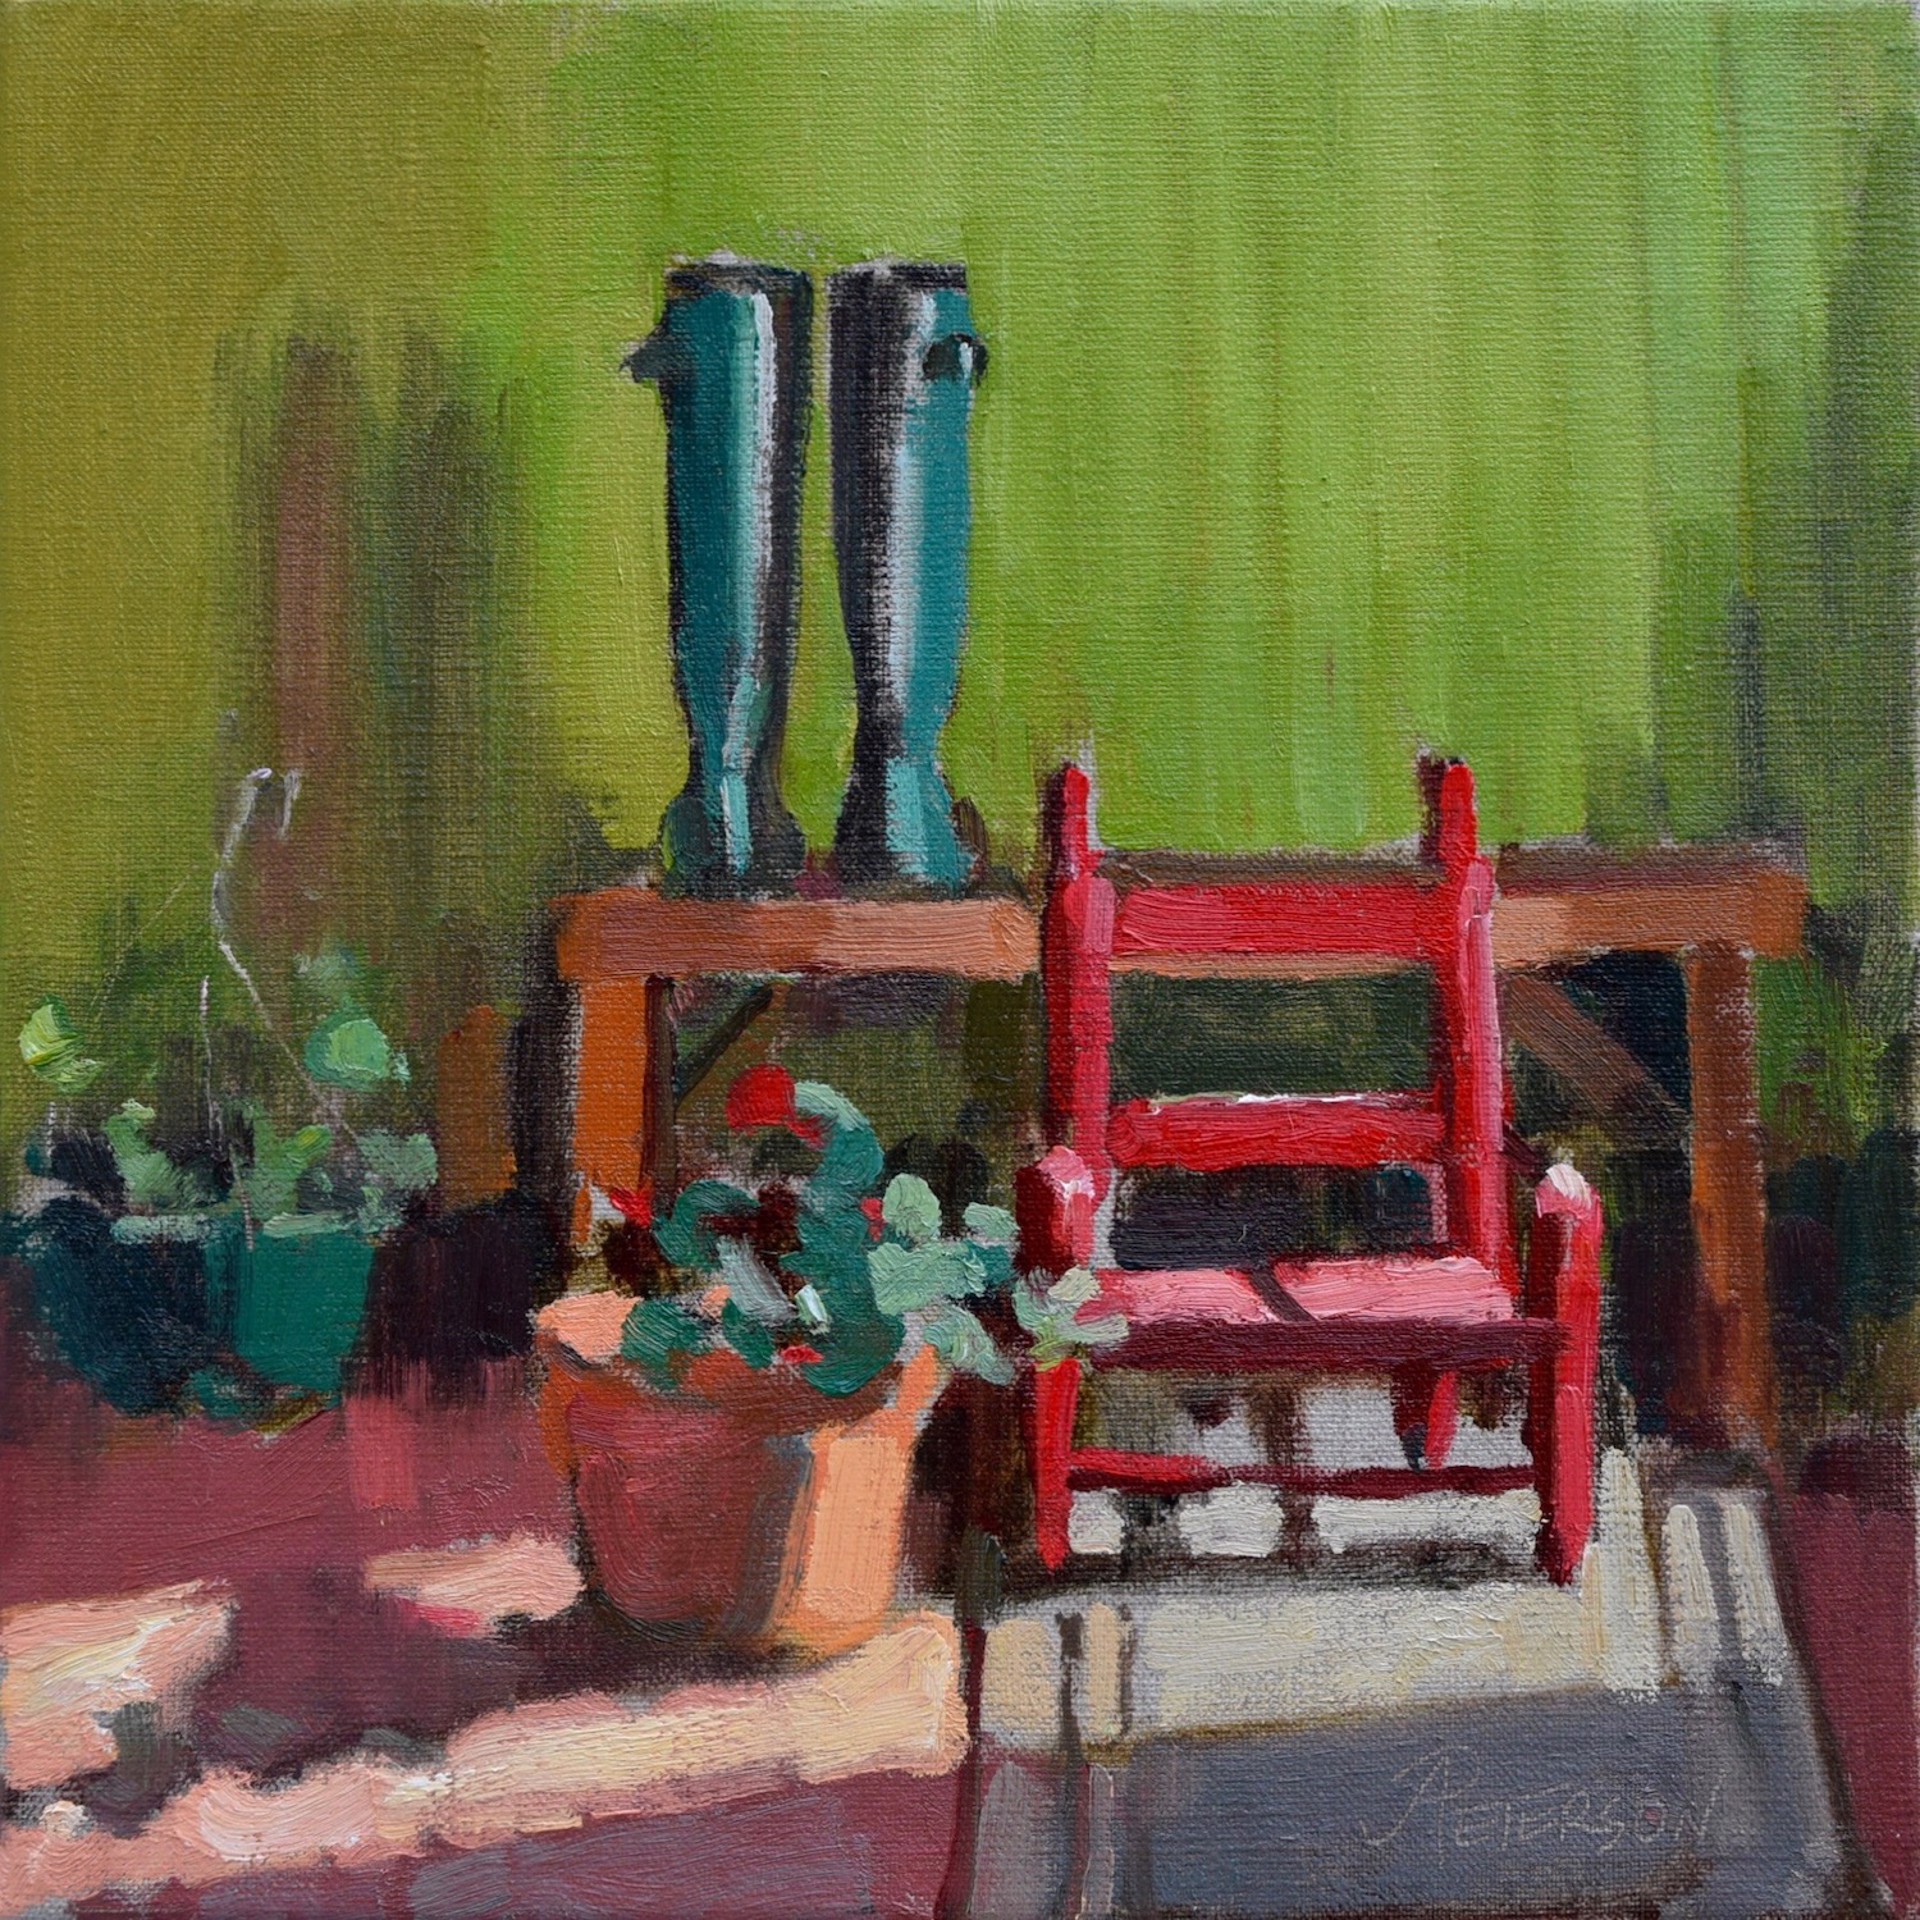 Geraniums and Red Chair by Amy R. Peterson